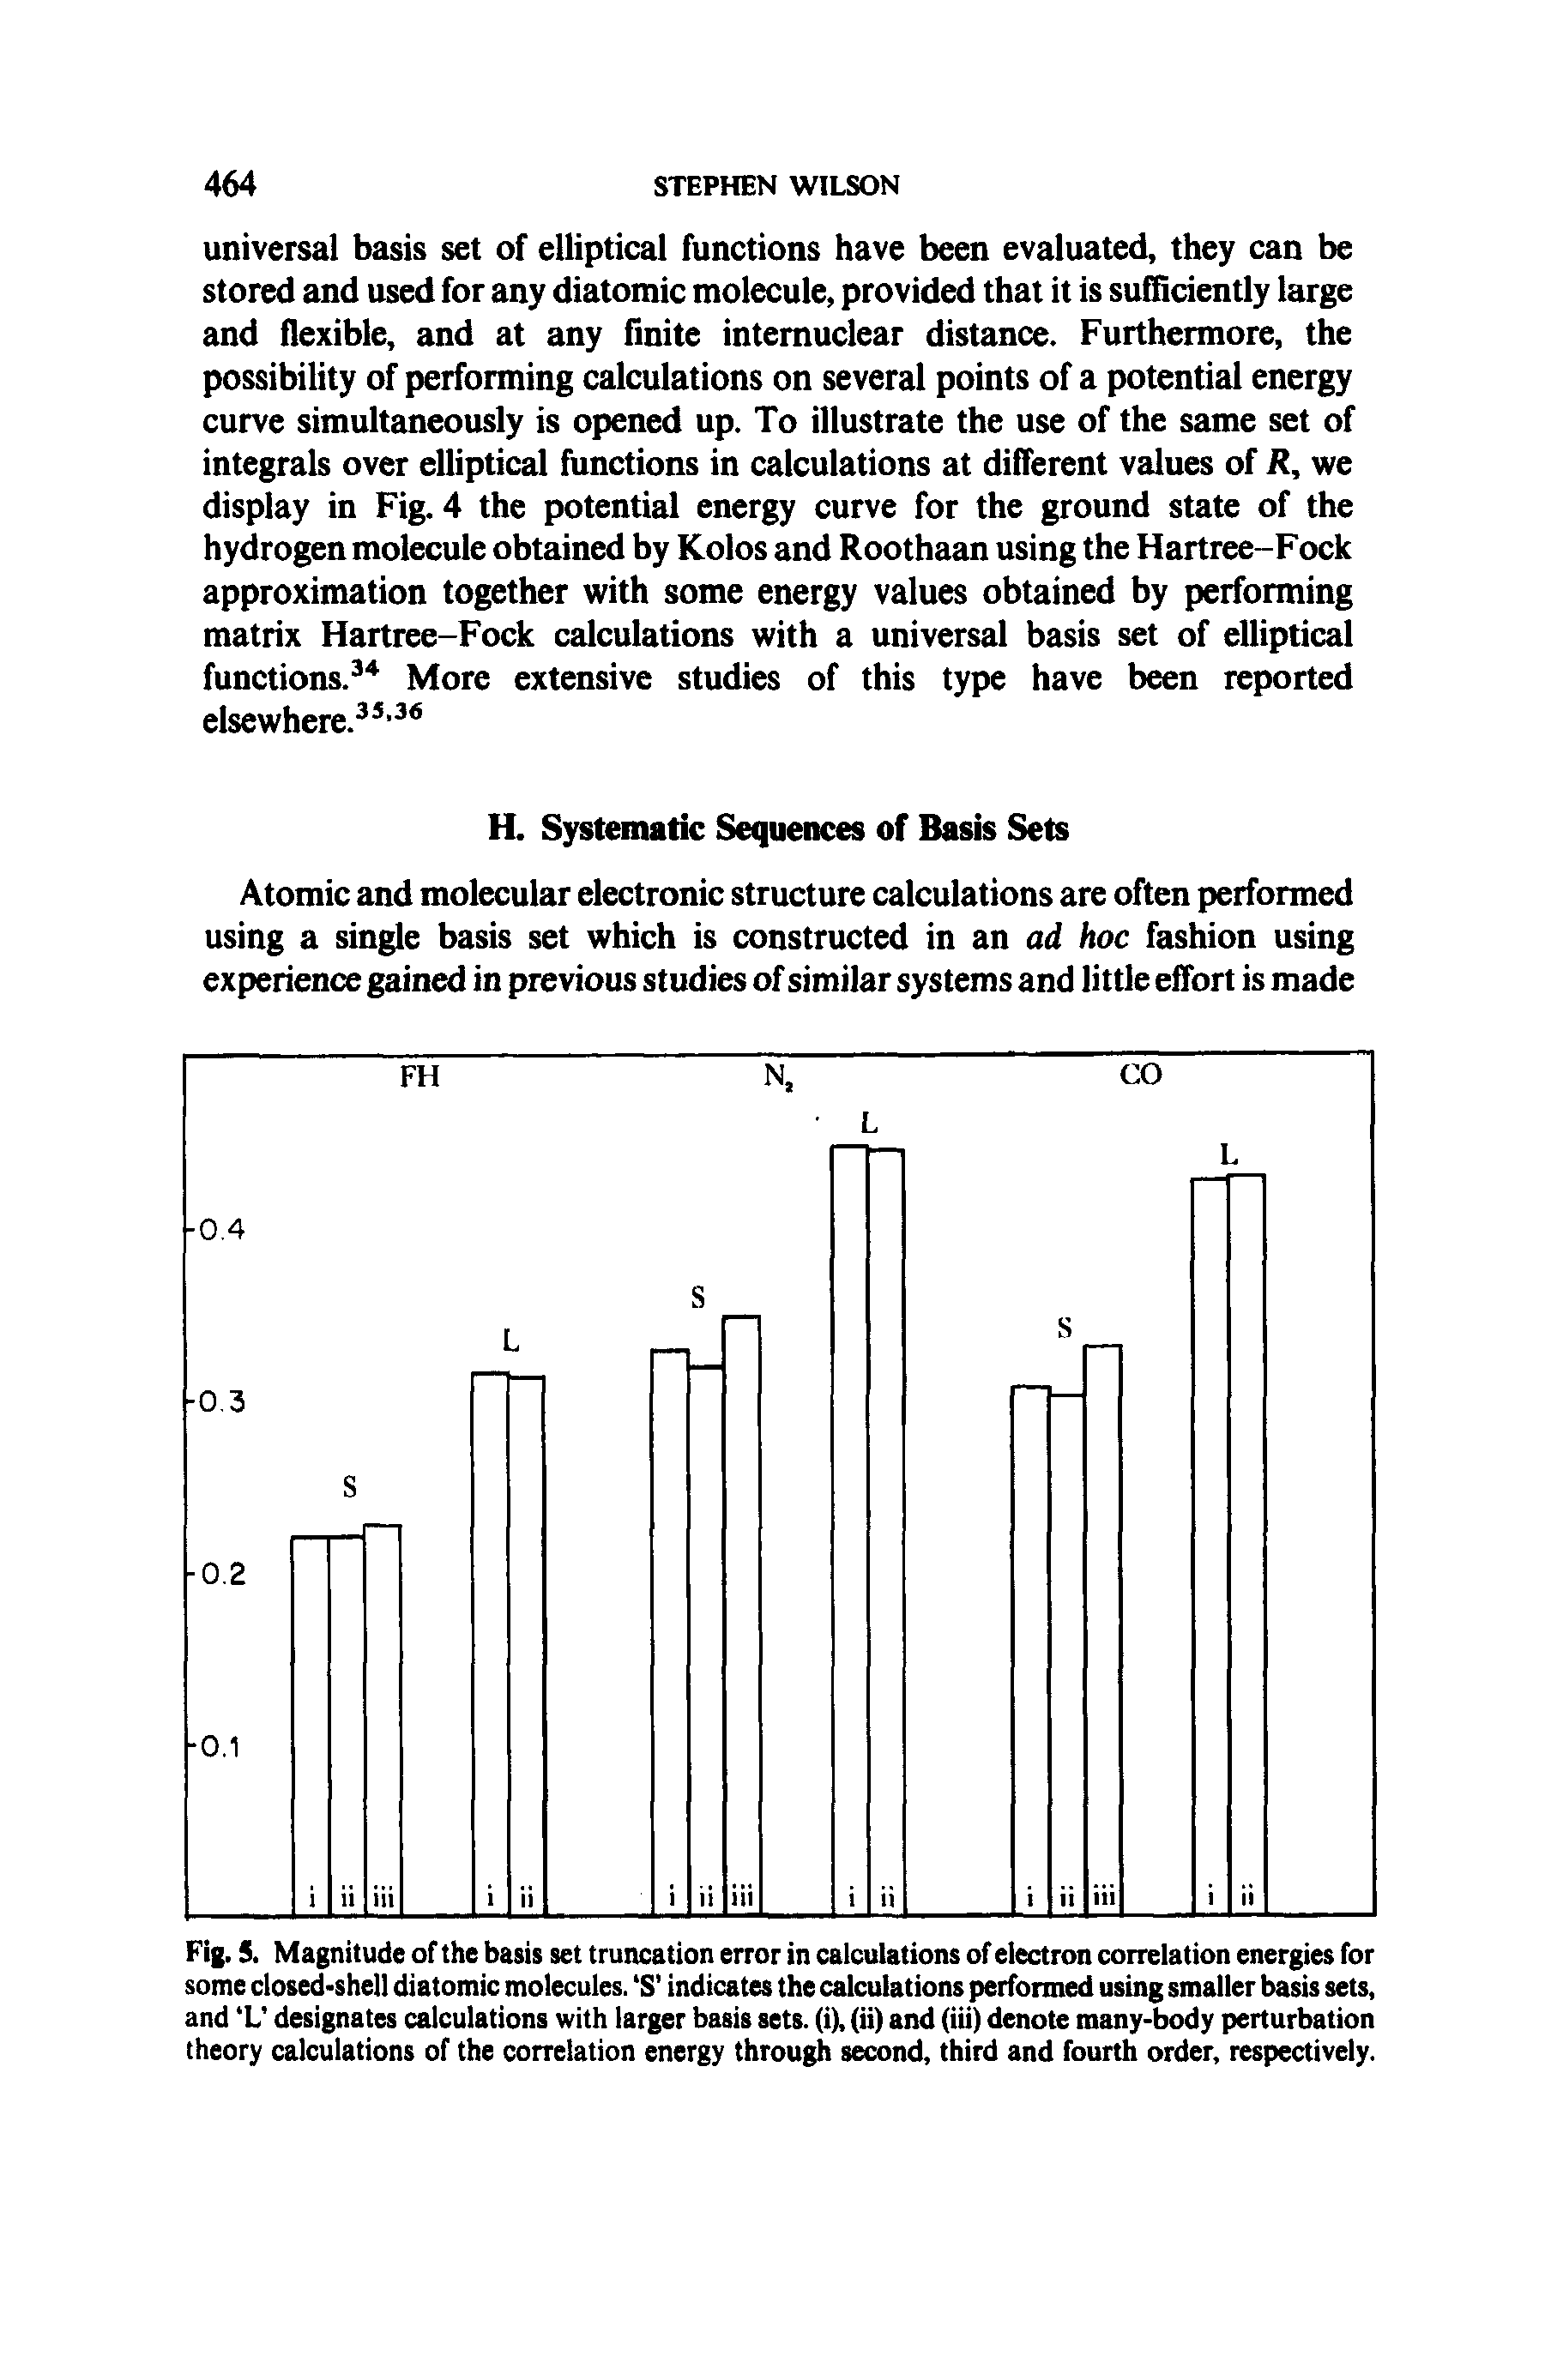 Fig. 5. Magnitude of the basis set truncation error in calculations of electron correlation energies for some closed-shell diatomic molecules. S indicates the calculations performed using smaller ba sets, and L designates calculations with larger basis sets, (i), (ii) and (iii) denote many-body perturbation theory calculations of the correlation energy through second, third and fourth order, respectively.